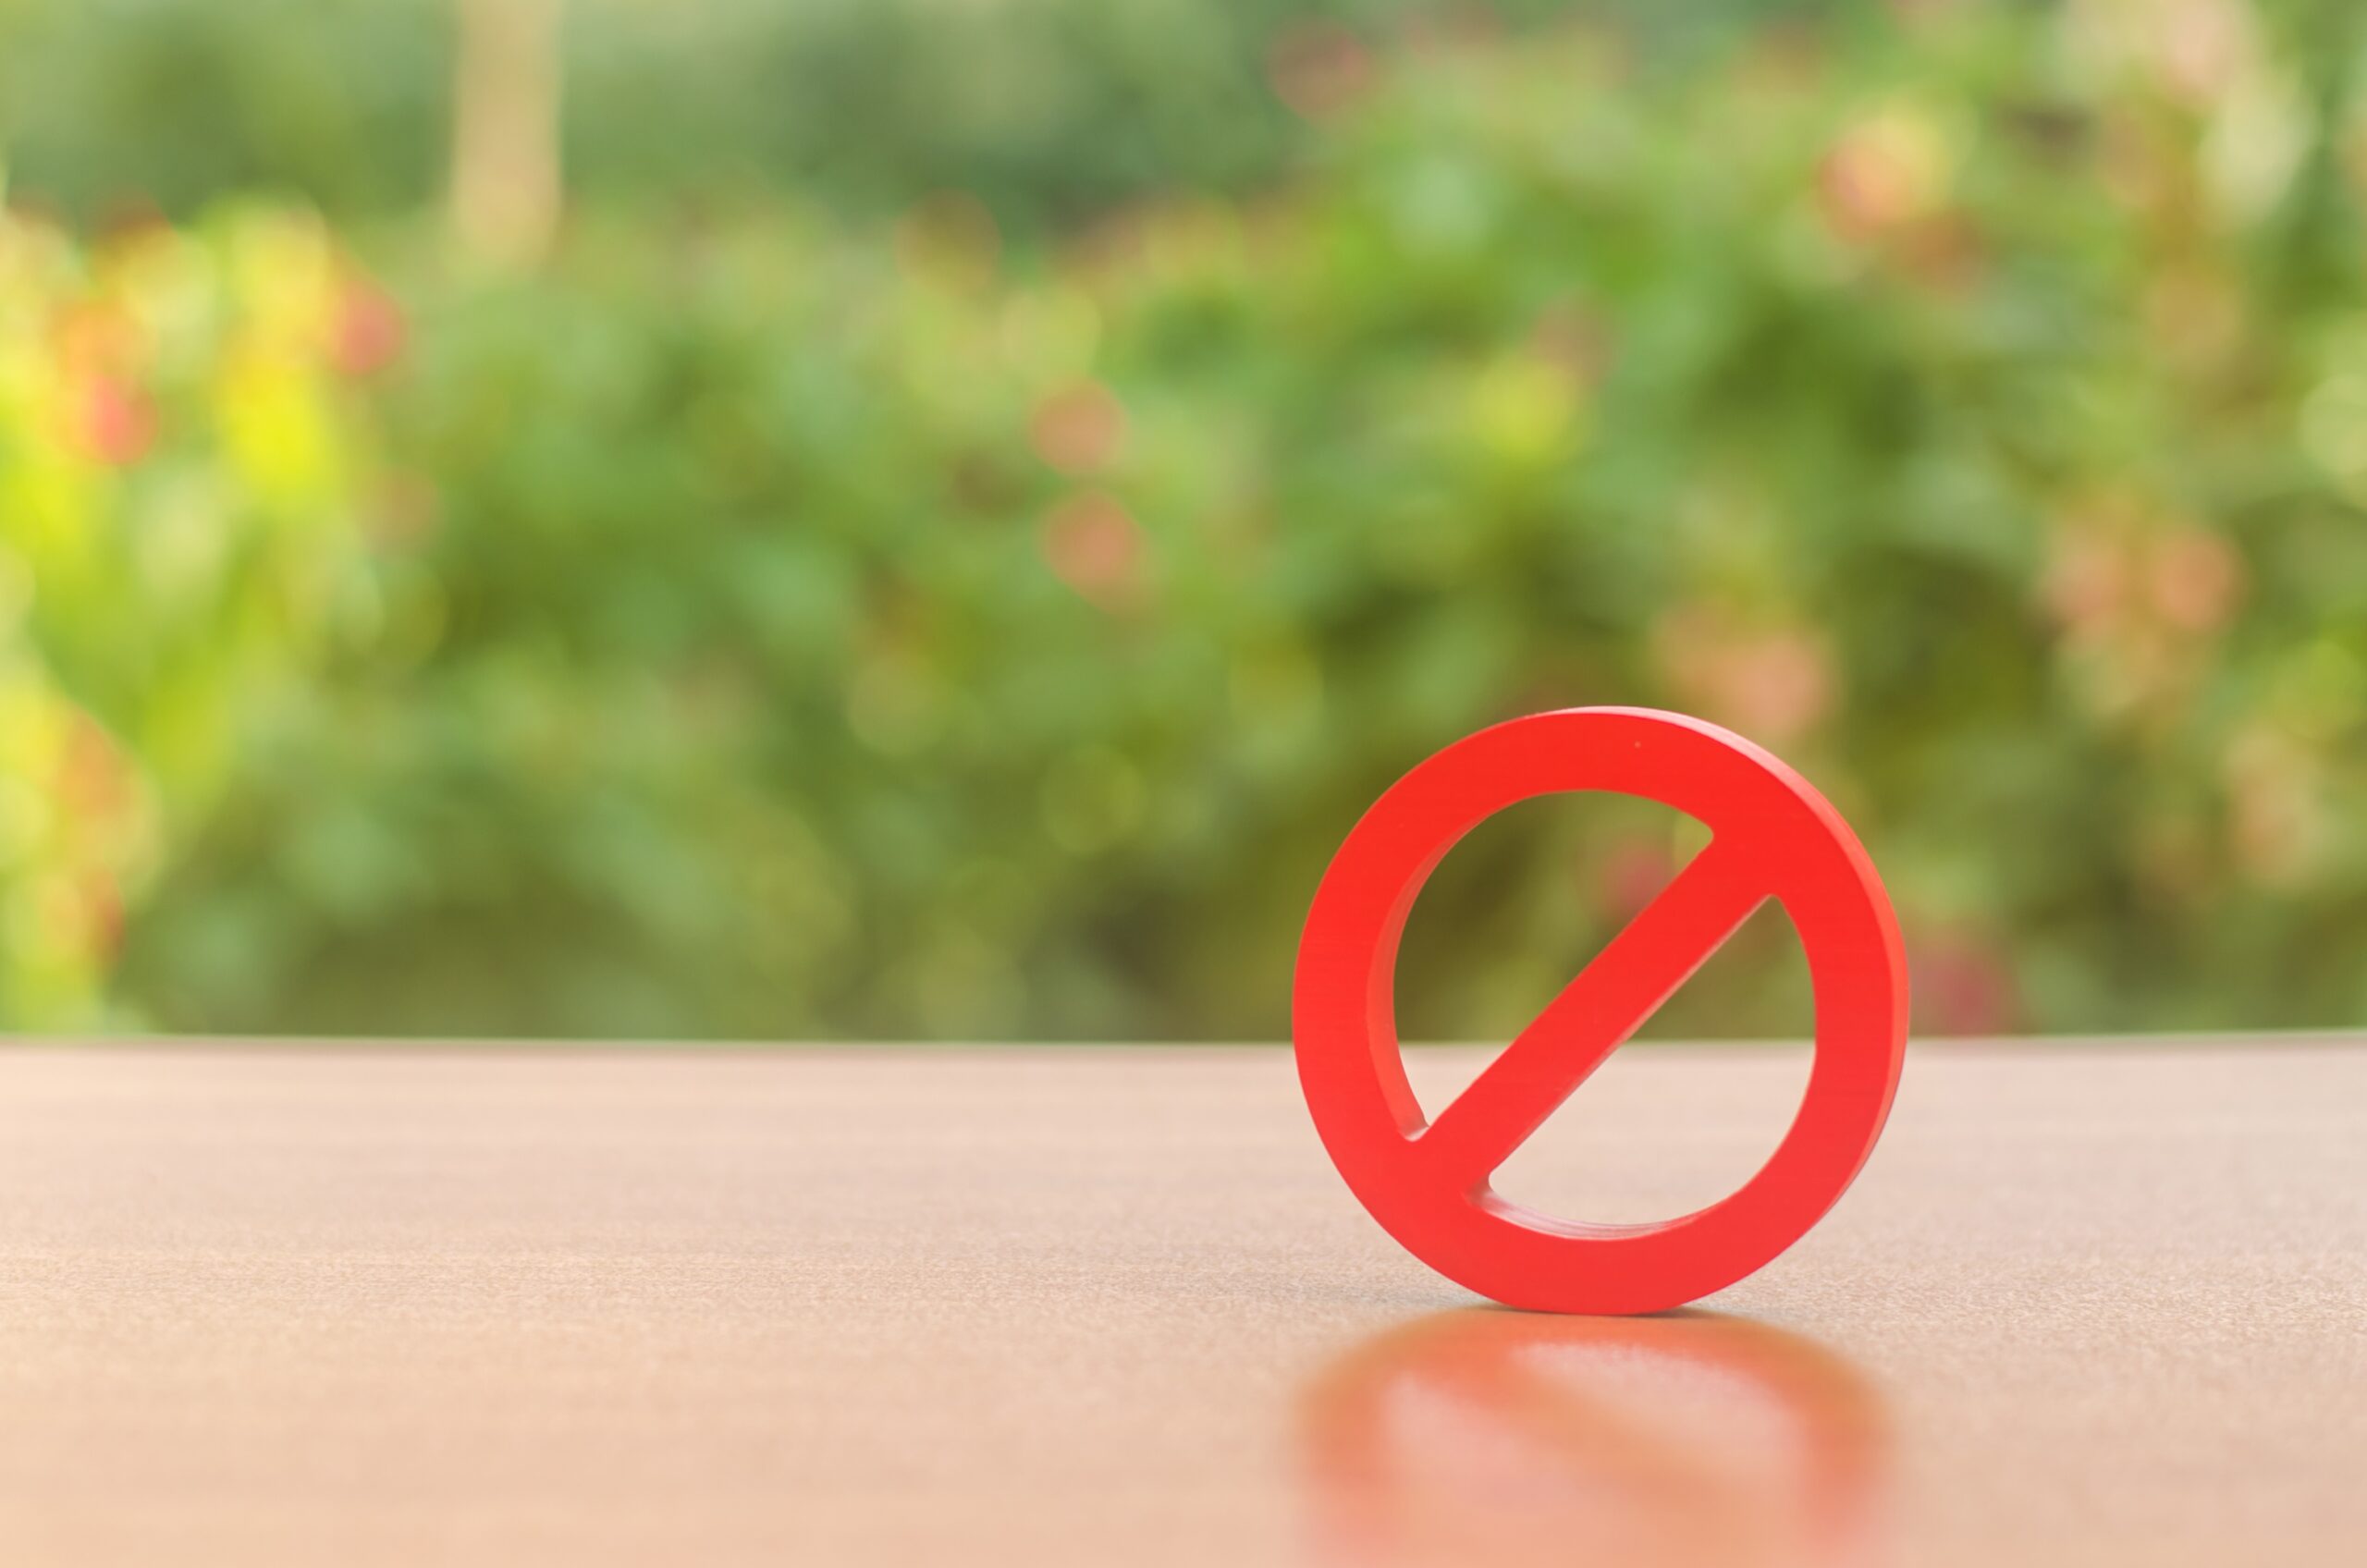 Image of a red circle with a line through it, representing "NO", with a green and brown background.